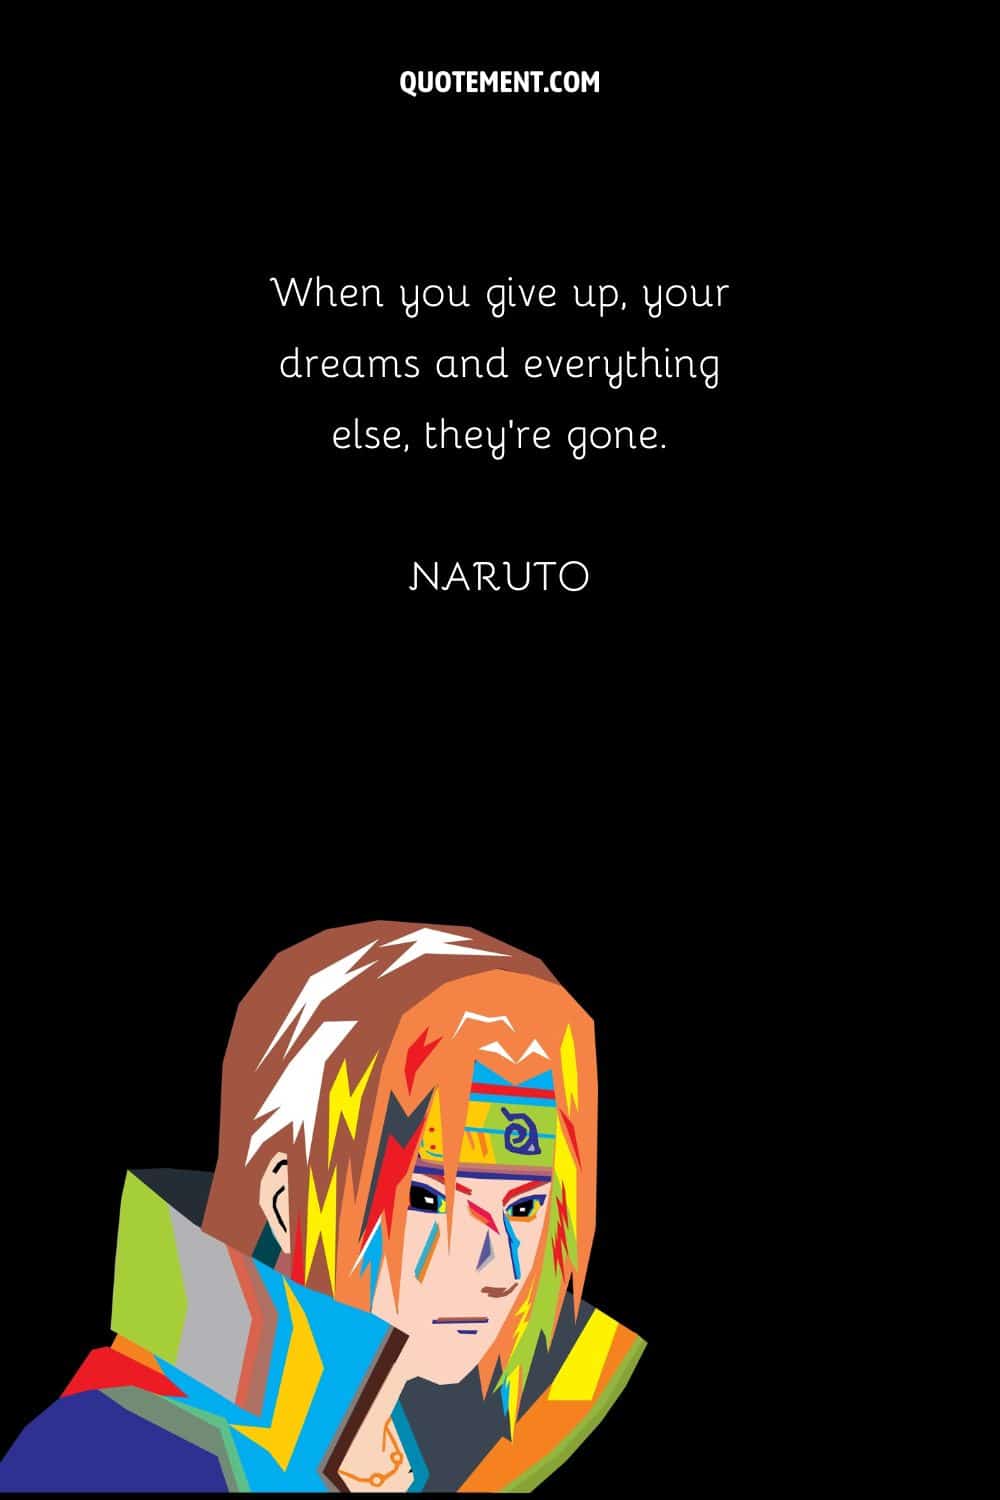 “When you give up, your dreams and everything else, they’re gone.” — Naruto